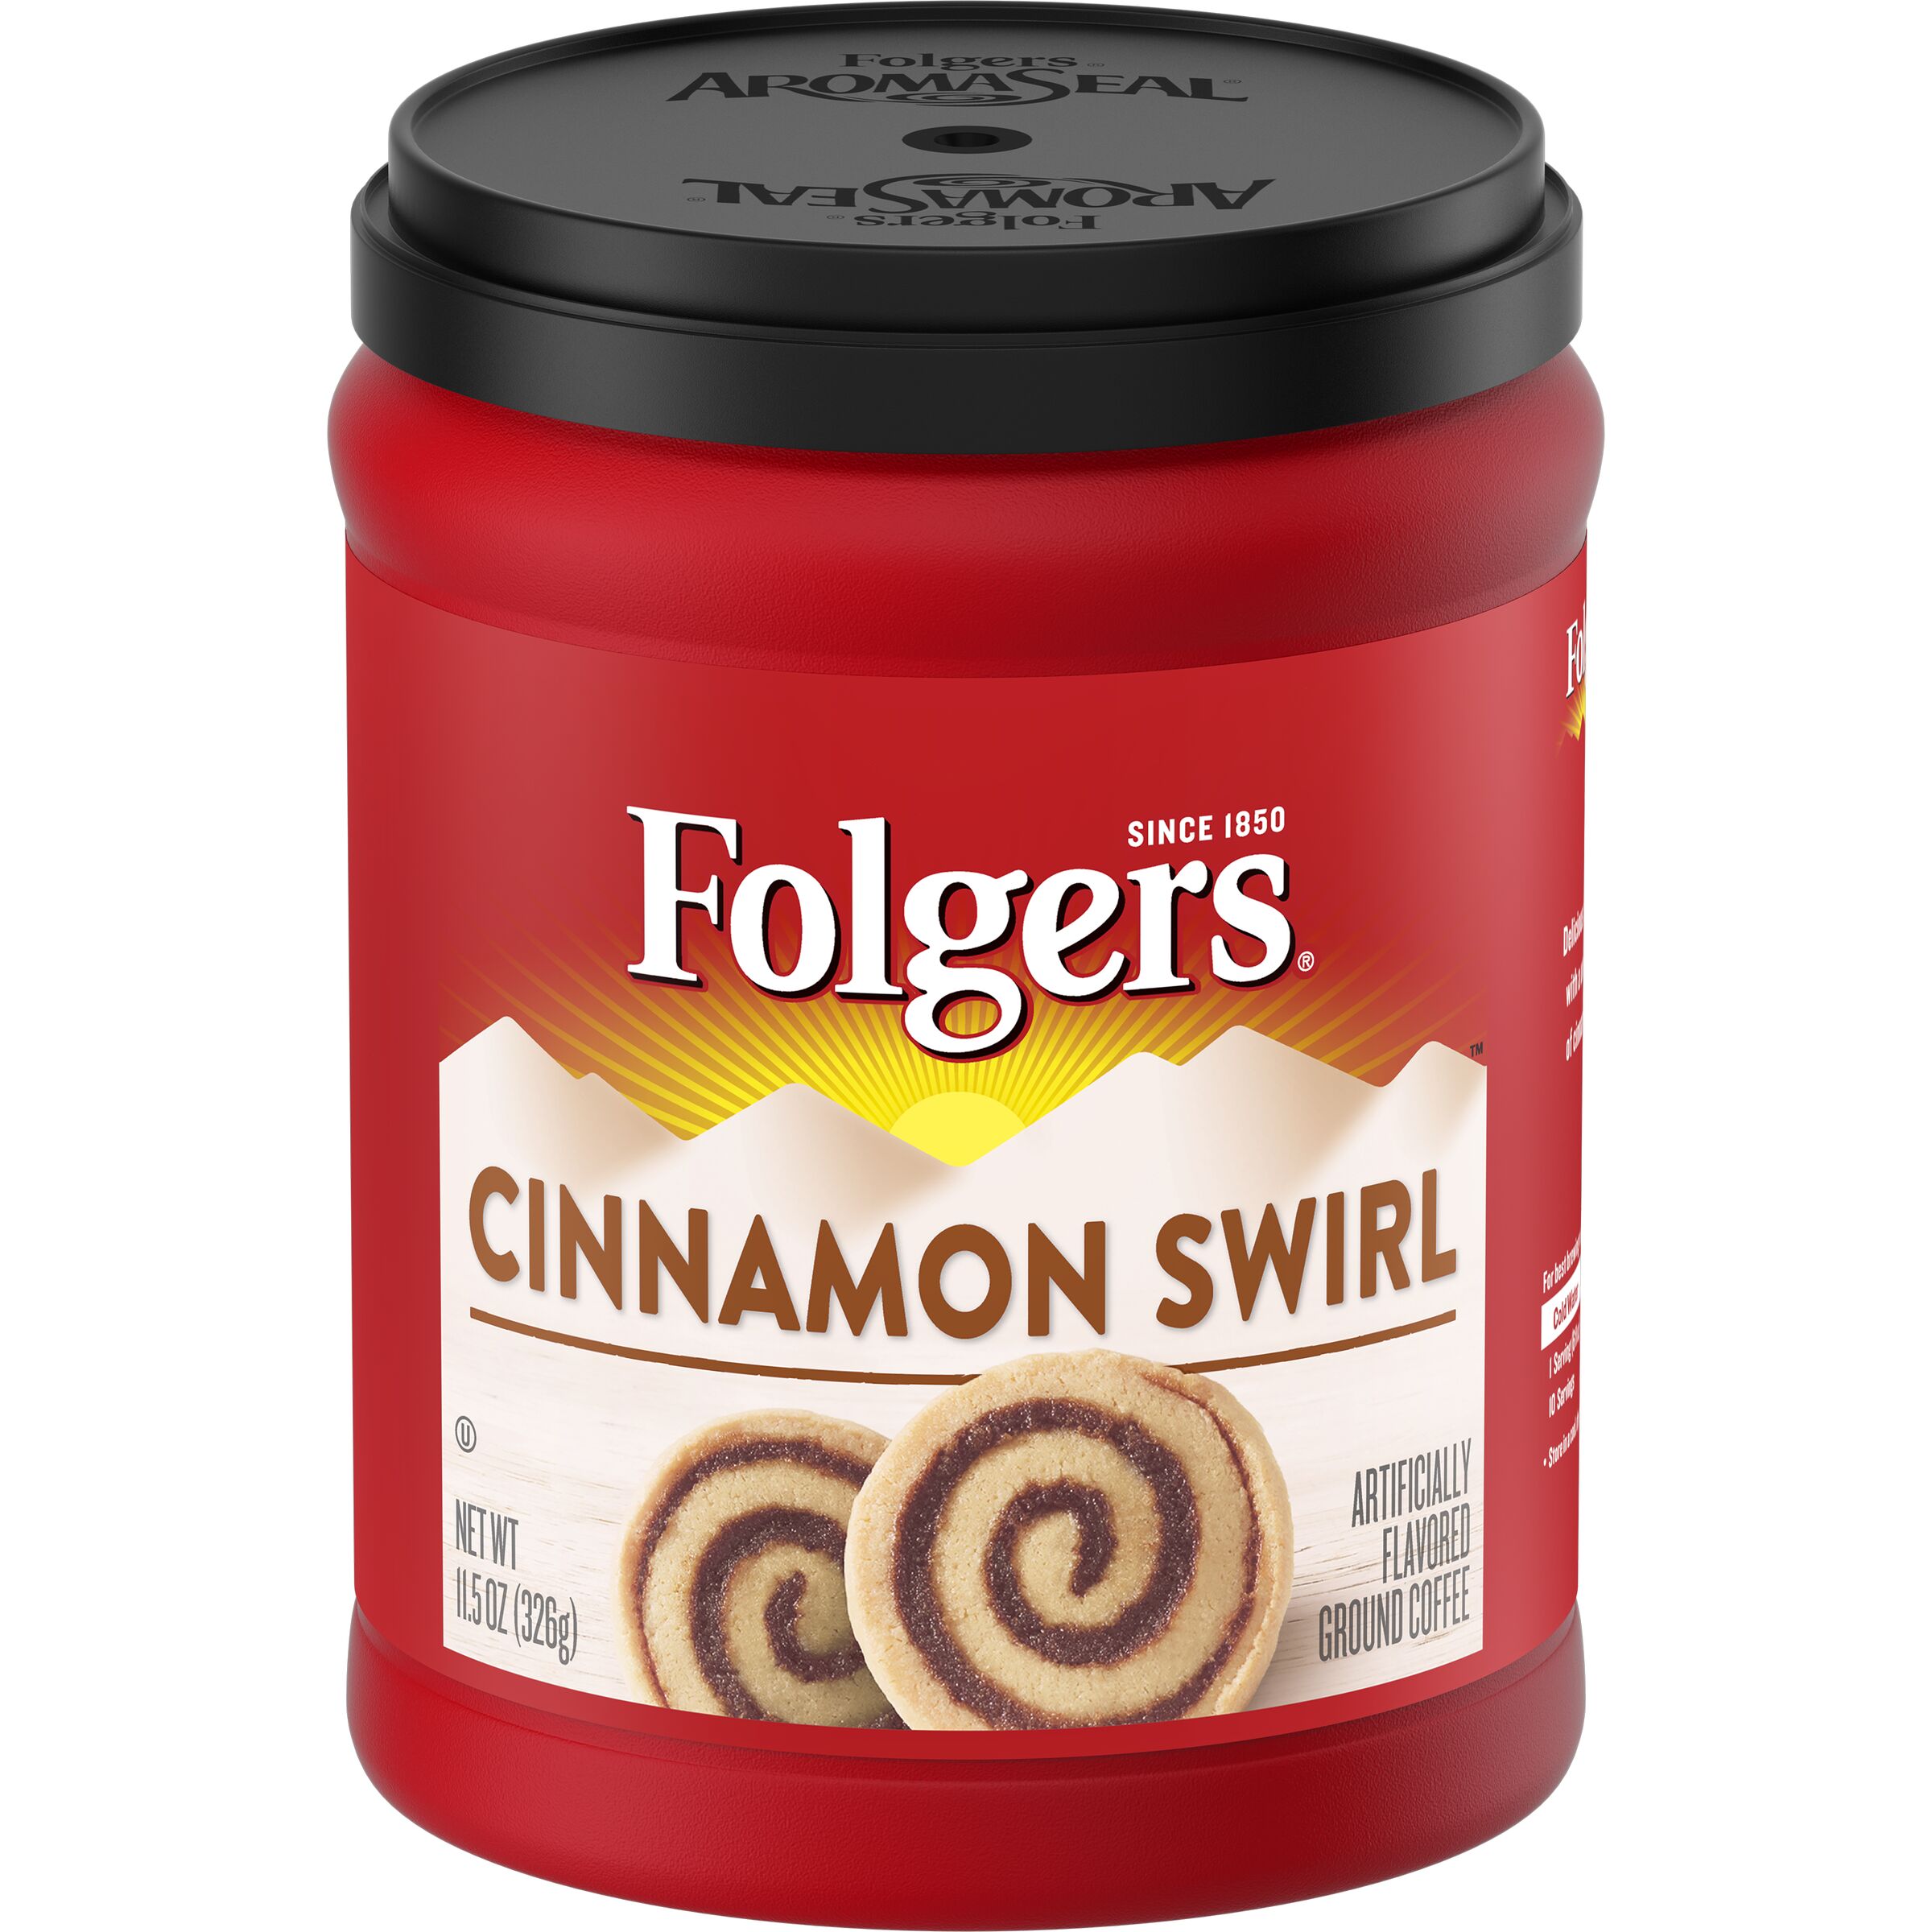 Folgers Cinnamon Swirl Artificially Flavored Ground Coffee, 11.5-Ounce - image 3 of 6